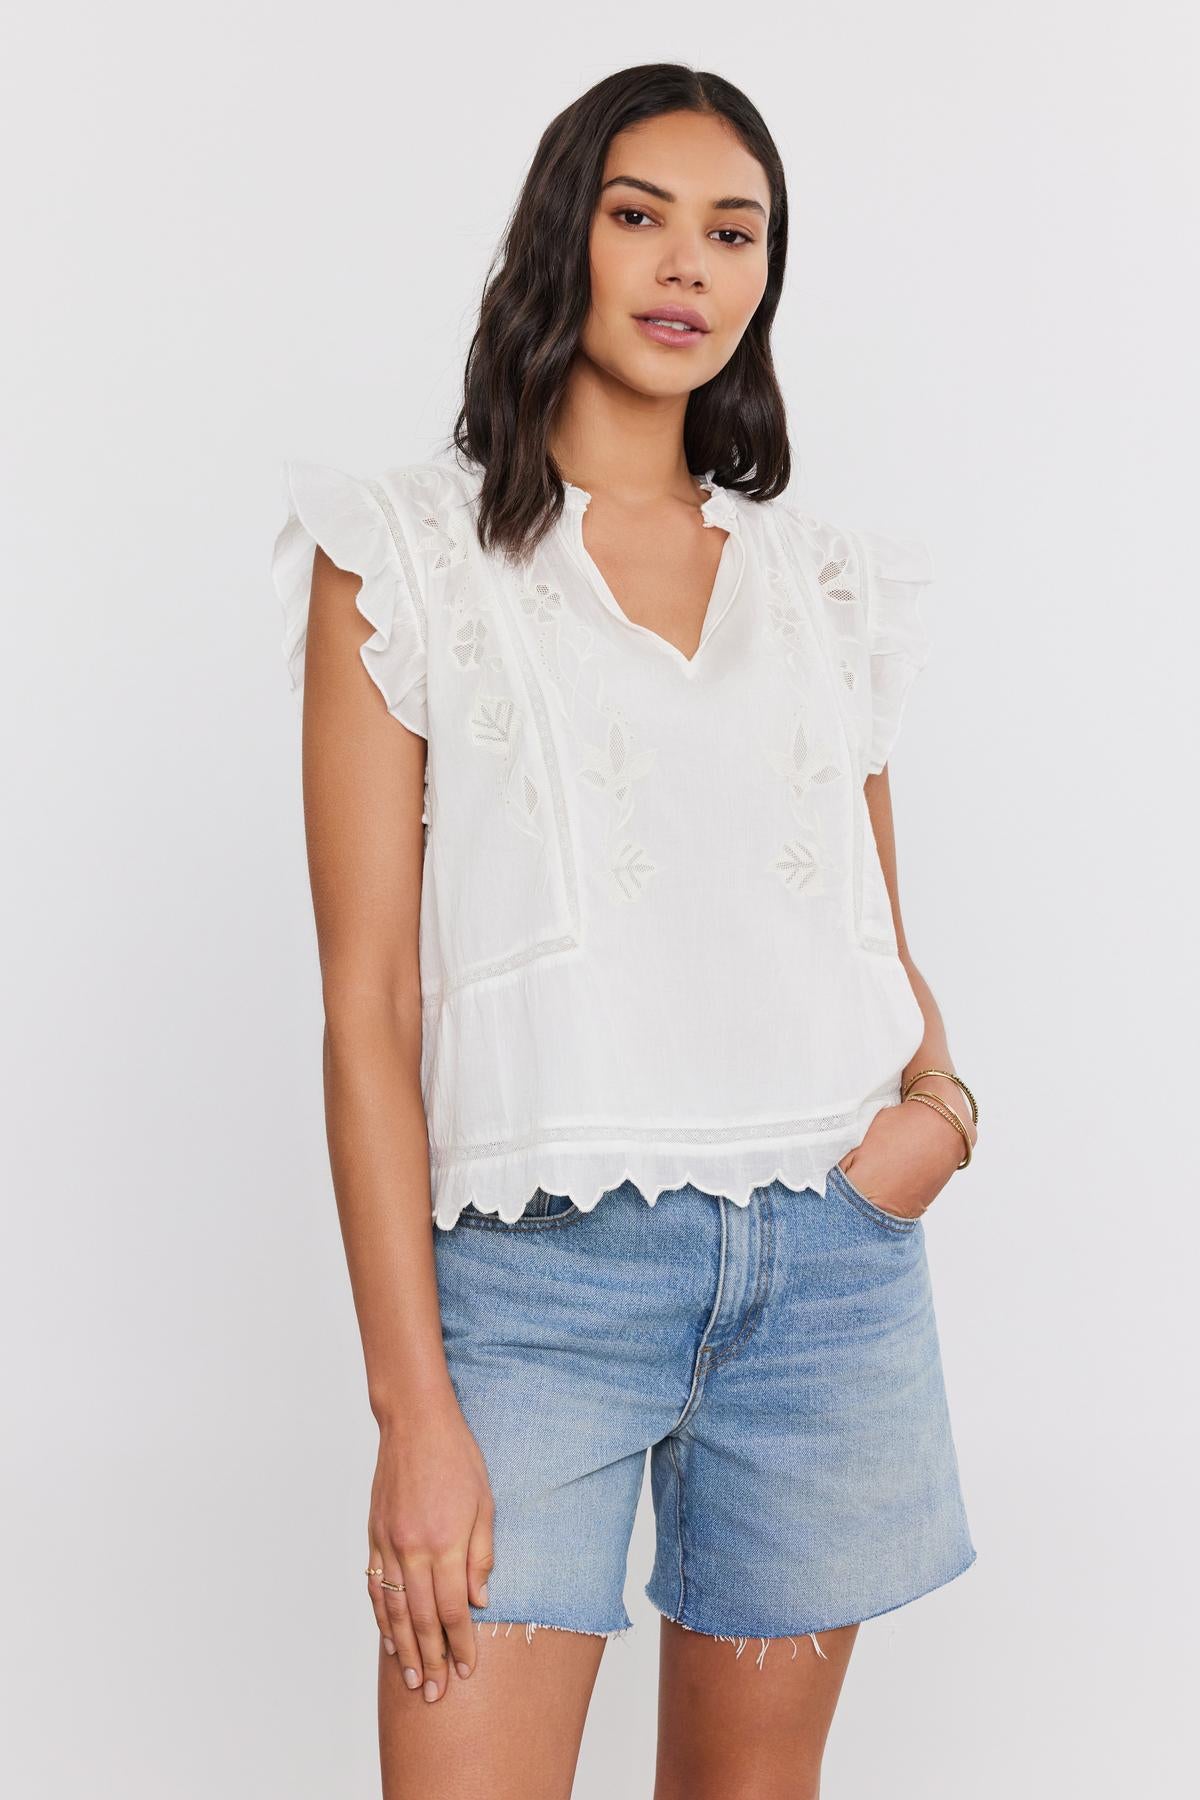 A woman in a white CHARLENE TOP with cotton embroidery and denim shorts, standing against a plain background. (Brand: Velvet by Graham & Spencer)-36830326751425